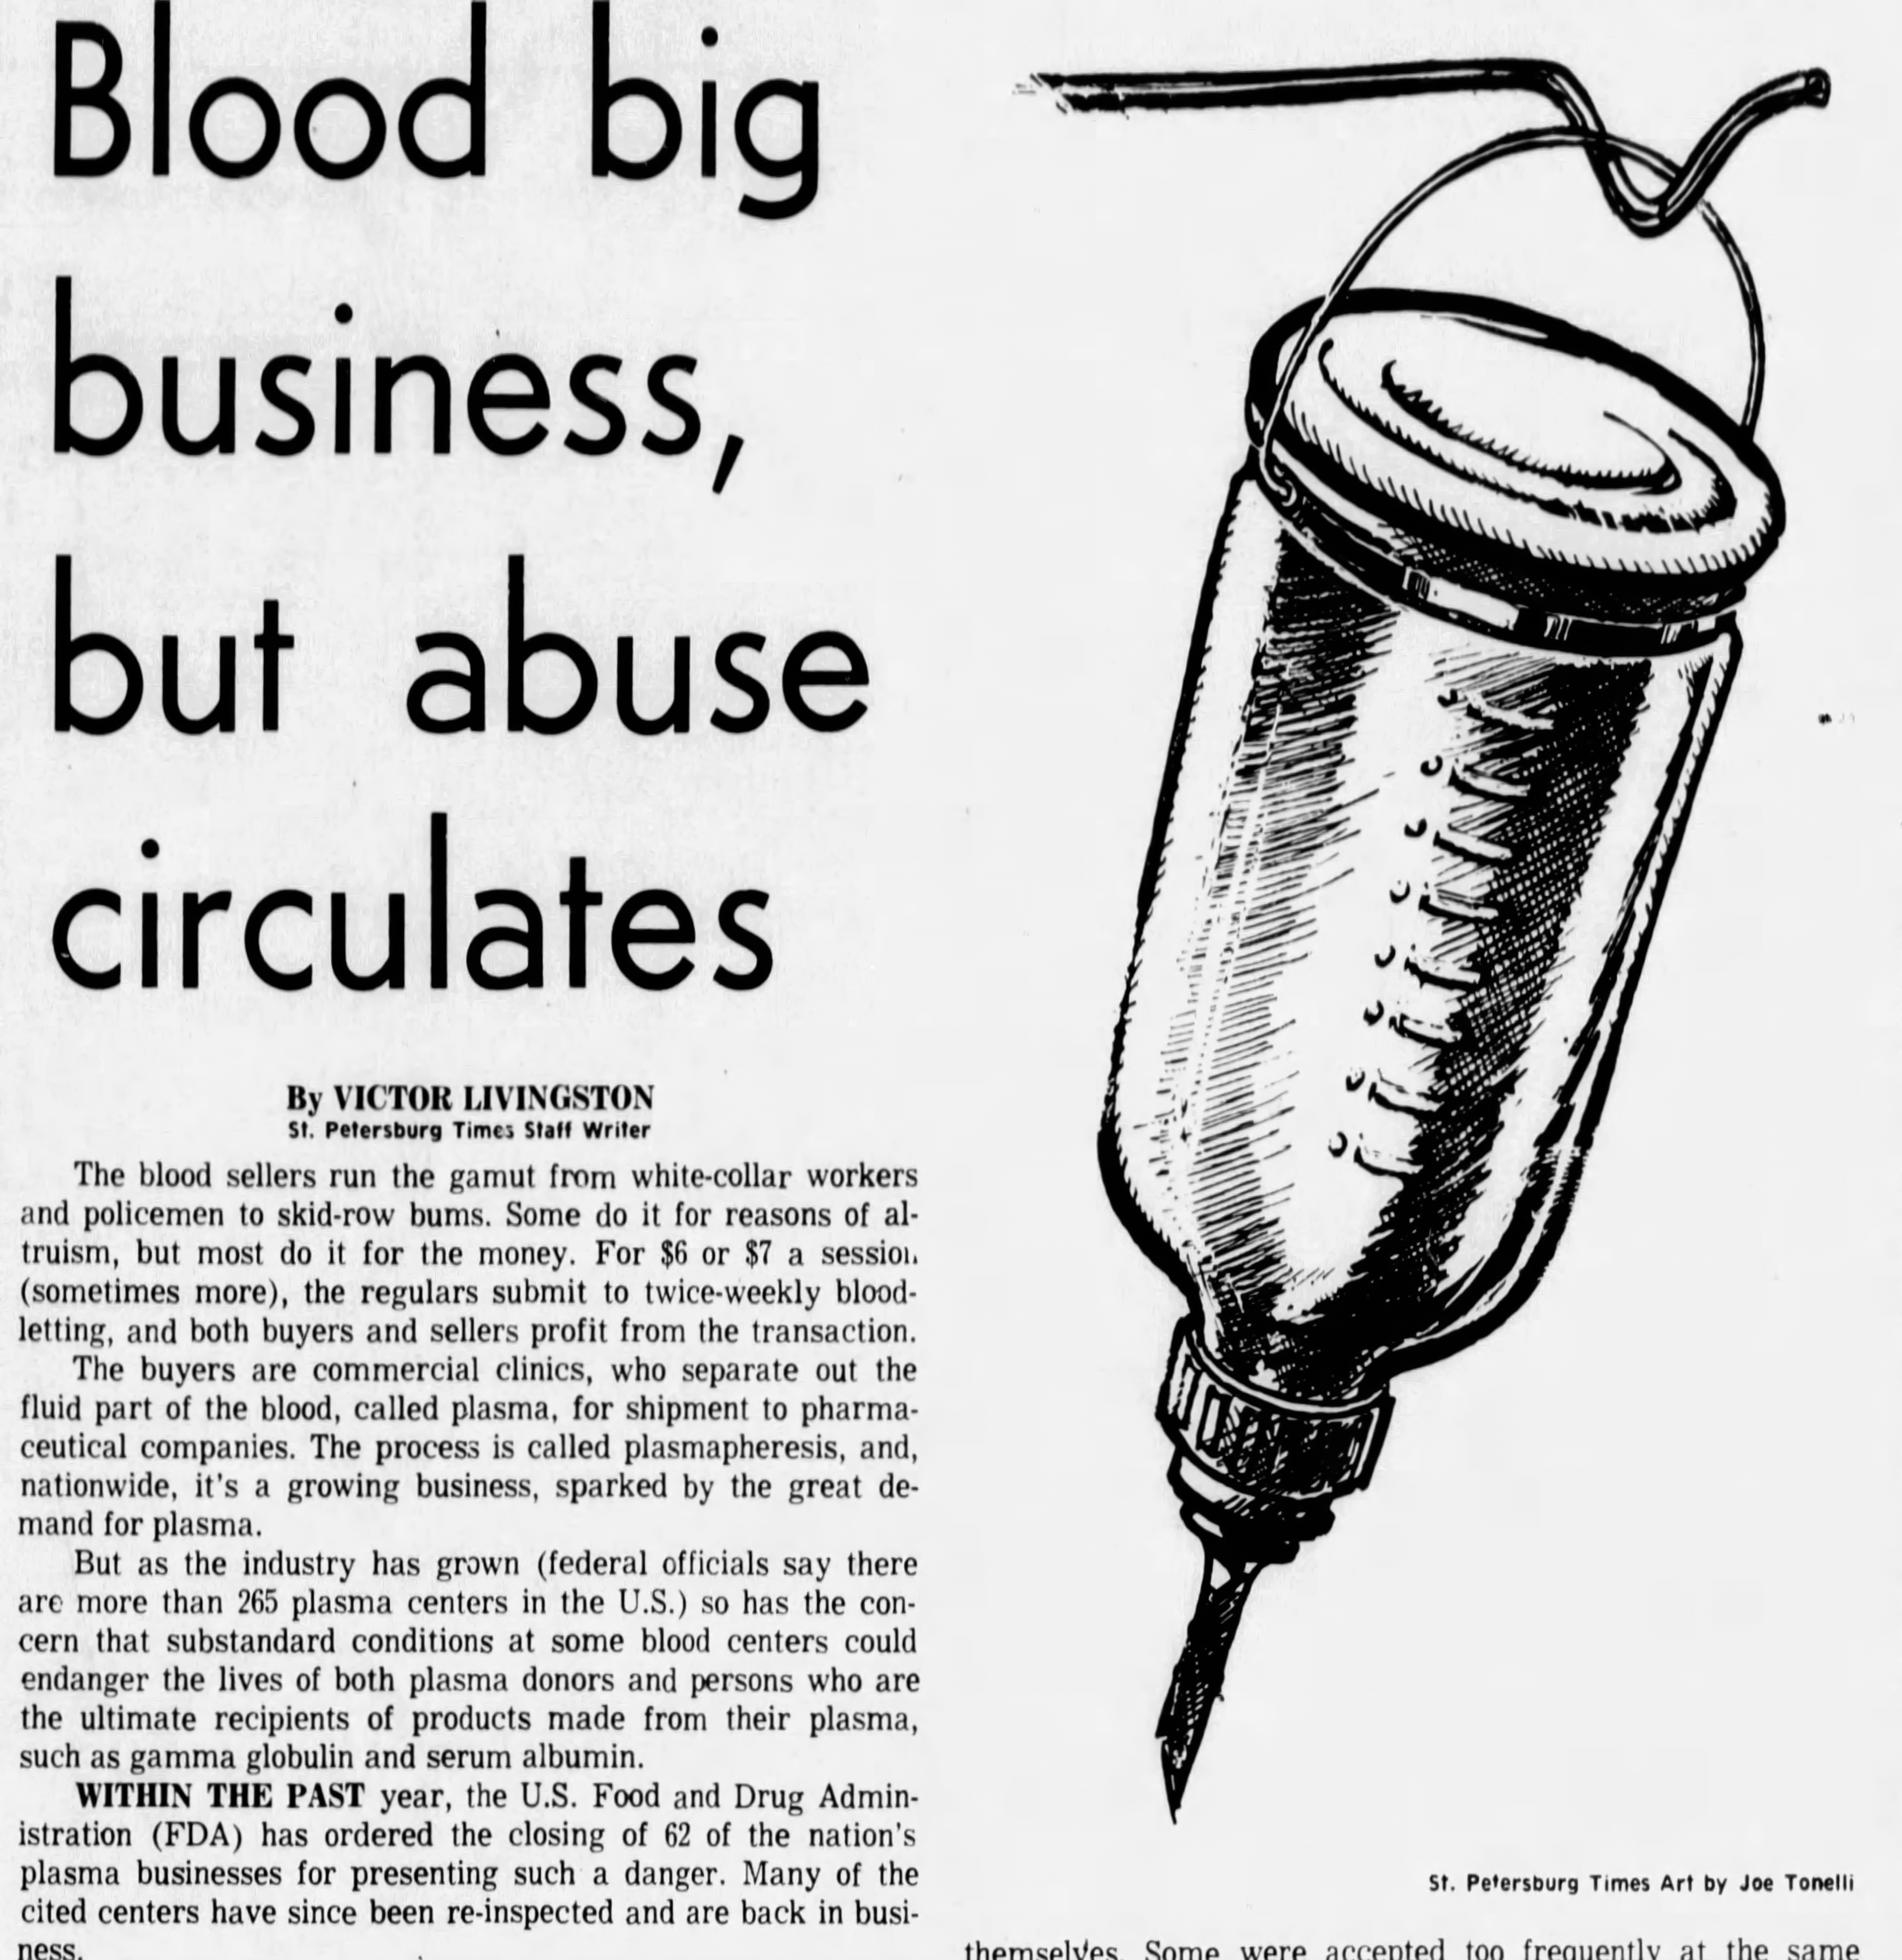 Newspaper article with the headline Blood big business but abuse circulates